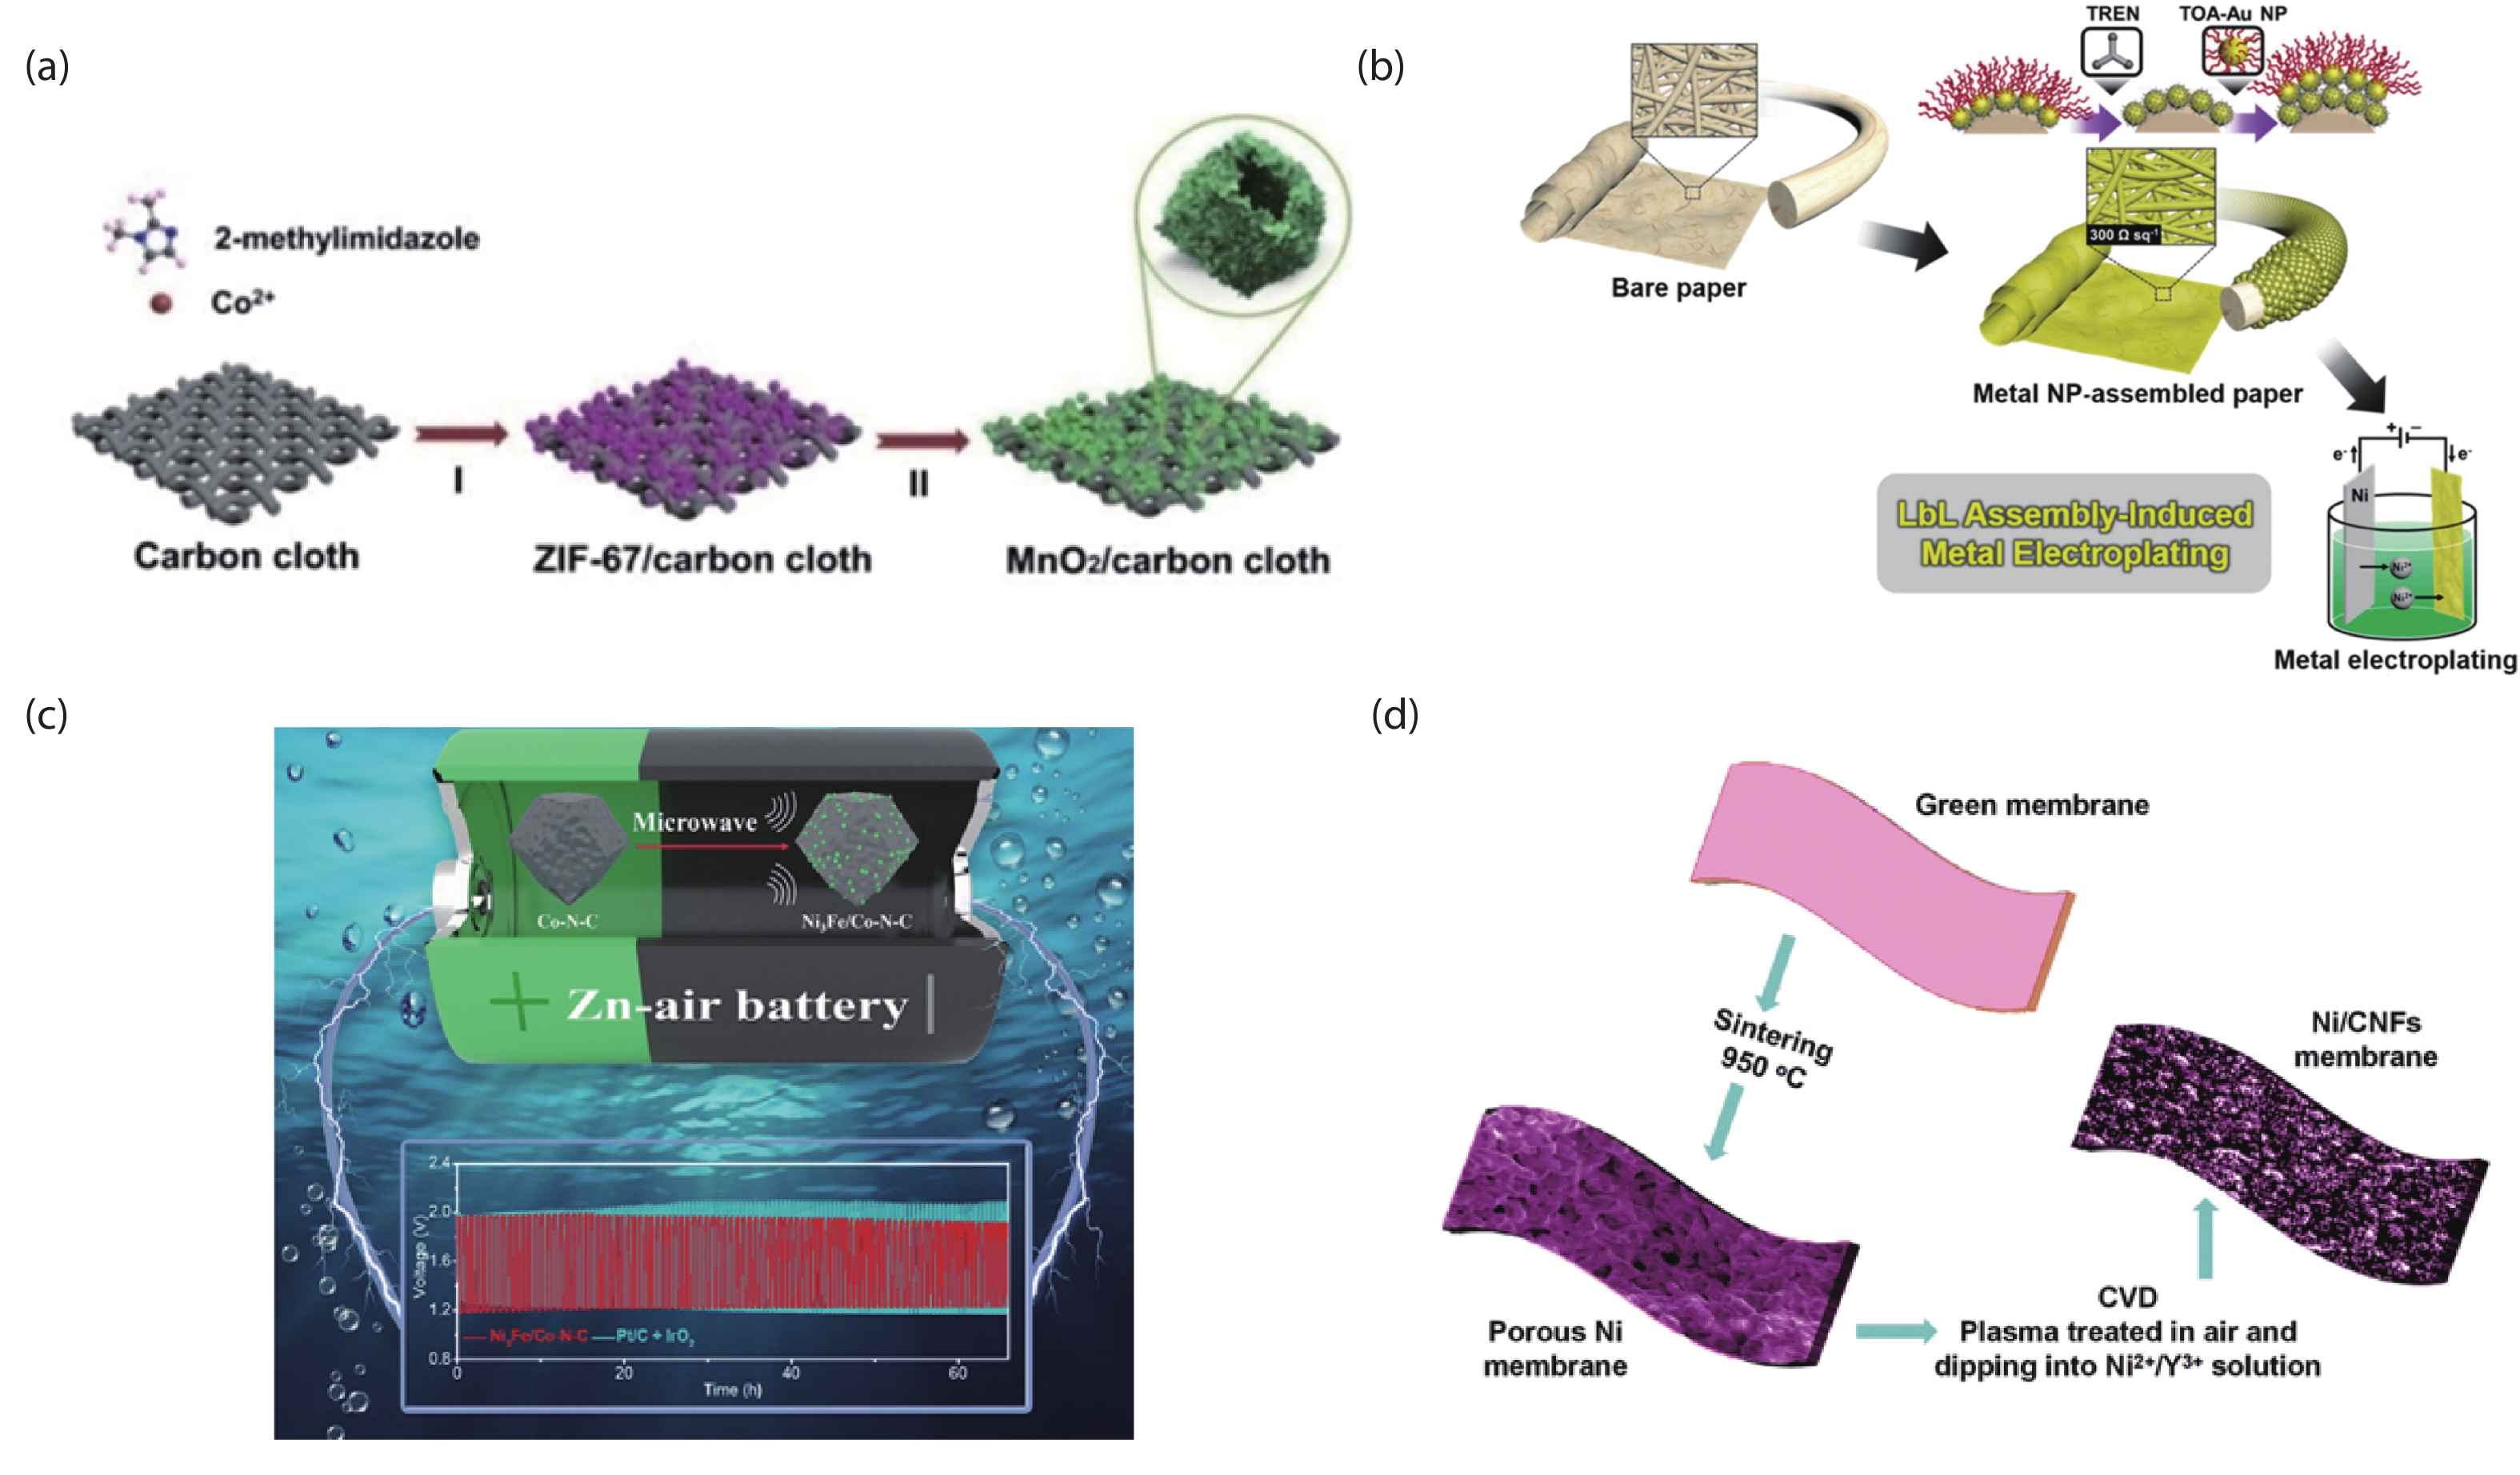 (Color online) Chemical methods for flexible energy storage devices fabrication. (a) Two-step hydrothermal synthesis of MnO2 nanosheet-assembled hollow polyhedrons on carbon cloth[20]. (b) Metal-like conductive paper electrodes based on Au nanoparticle assembly followed by nickel electroplating[10]. (c) A microwave-assisted rapid sysnthesis of nickel-iron-based catalysts for rechargeable zinc-air battery[32]. (d) Synthesis of 3D nanofiber electrode via CVD[36].